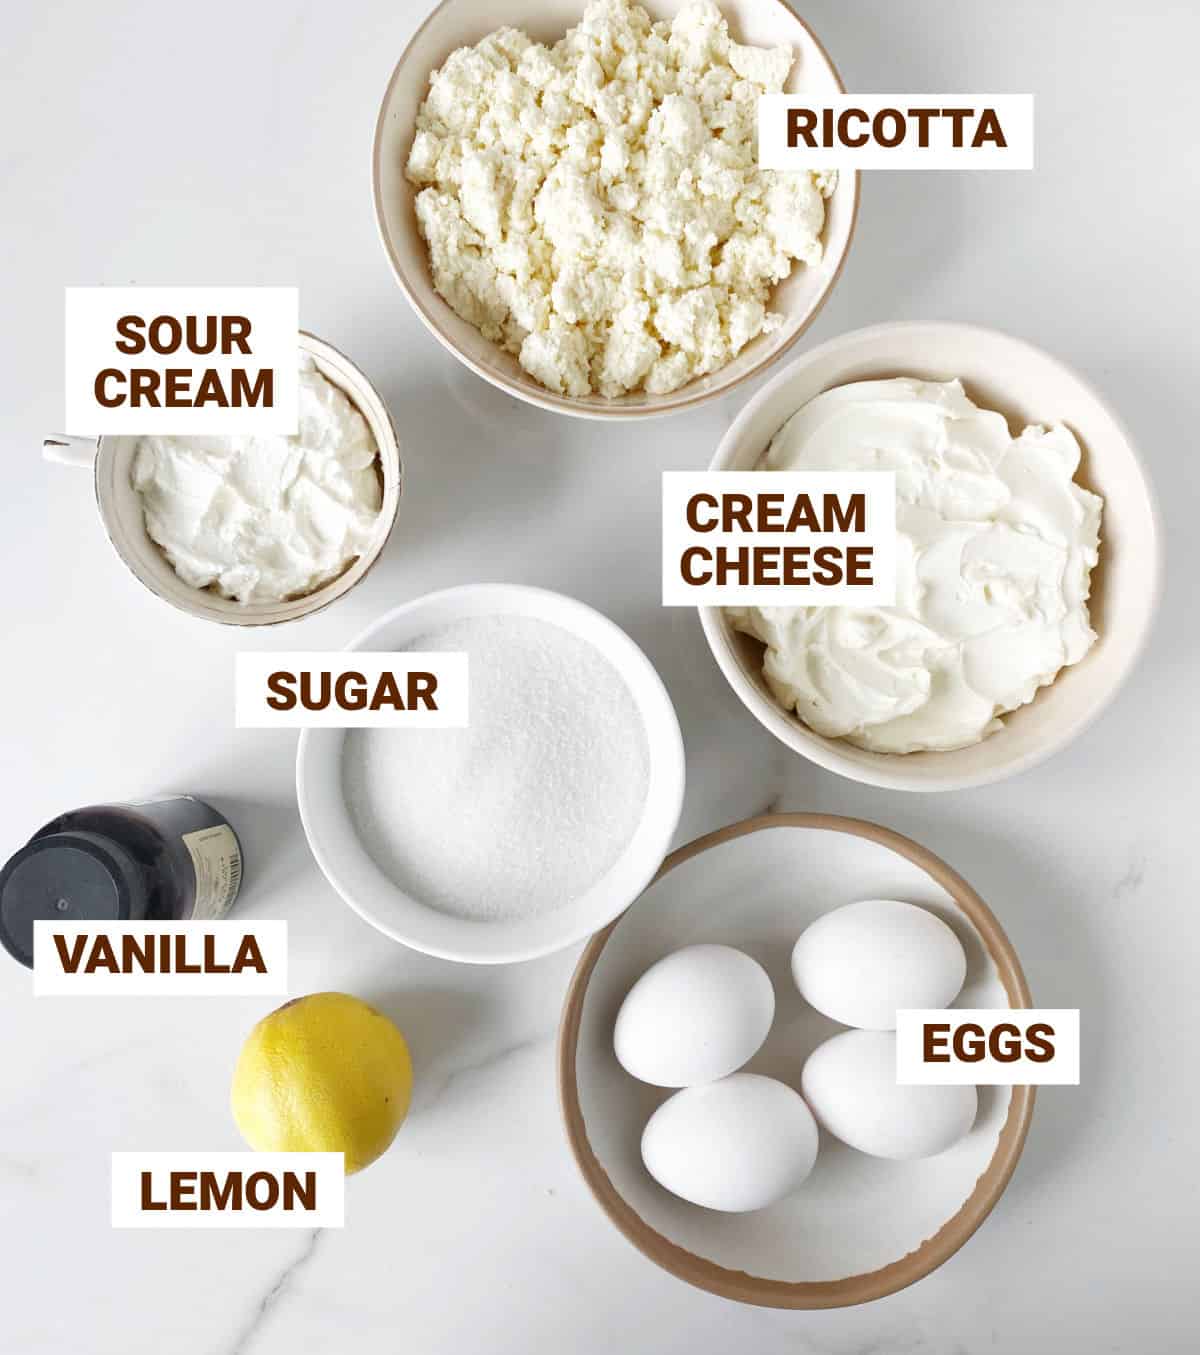 Ingredients for ricotta cheesecake in bowls on white marble, including lemon, vanilla, sugar, eggs, sour cream, cream cheese.